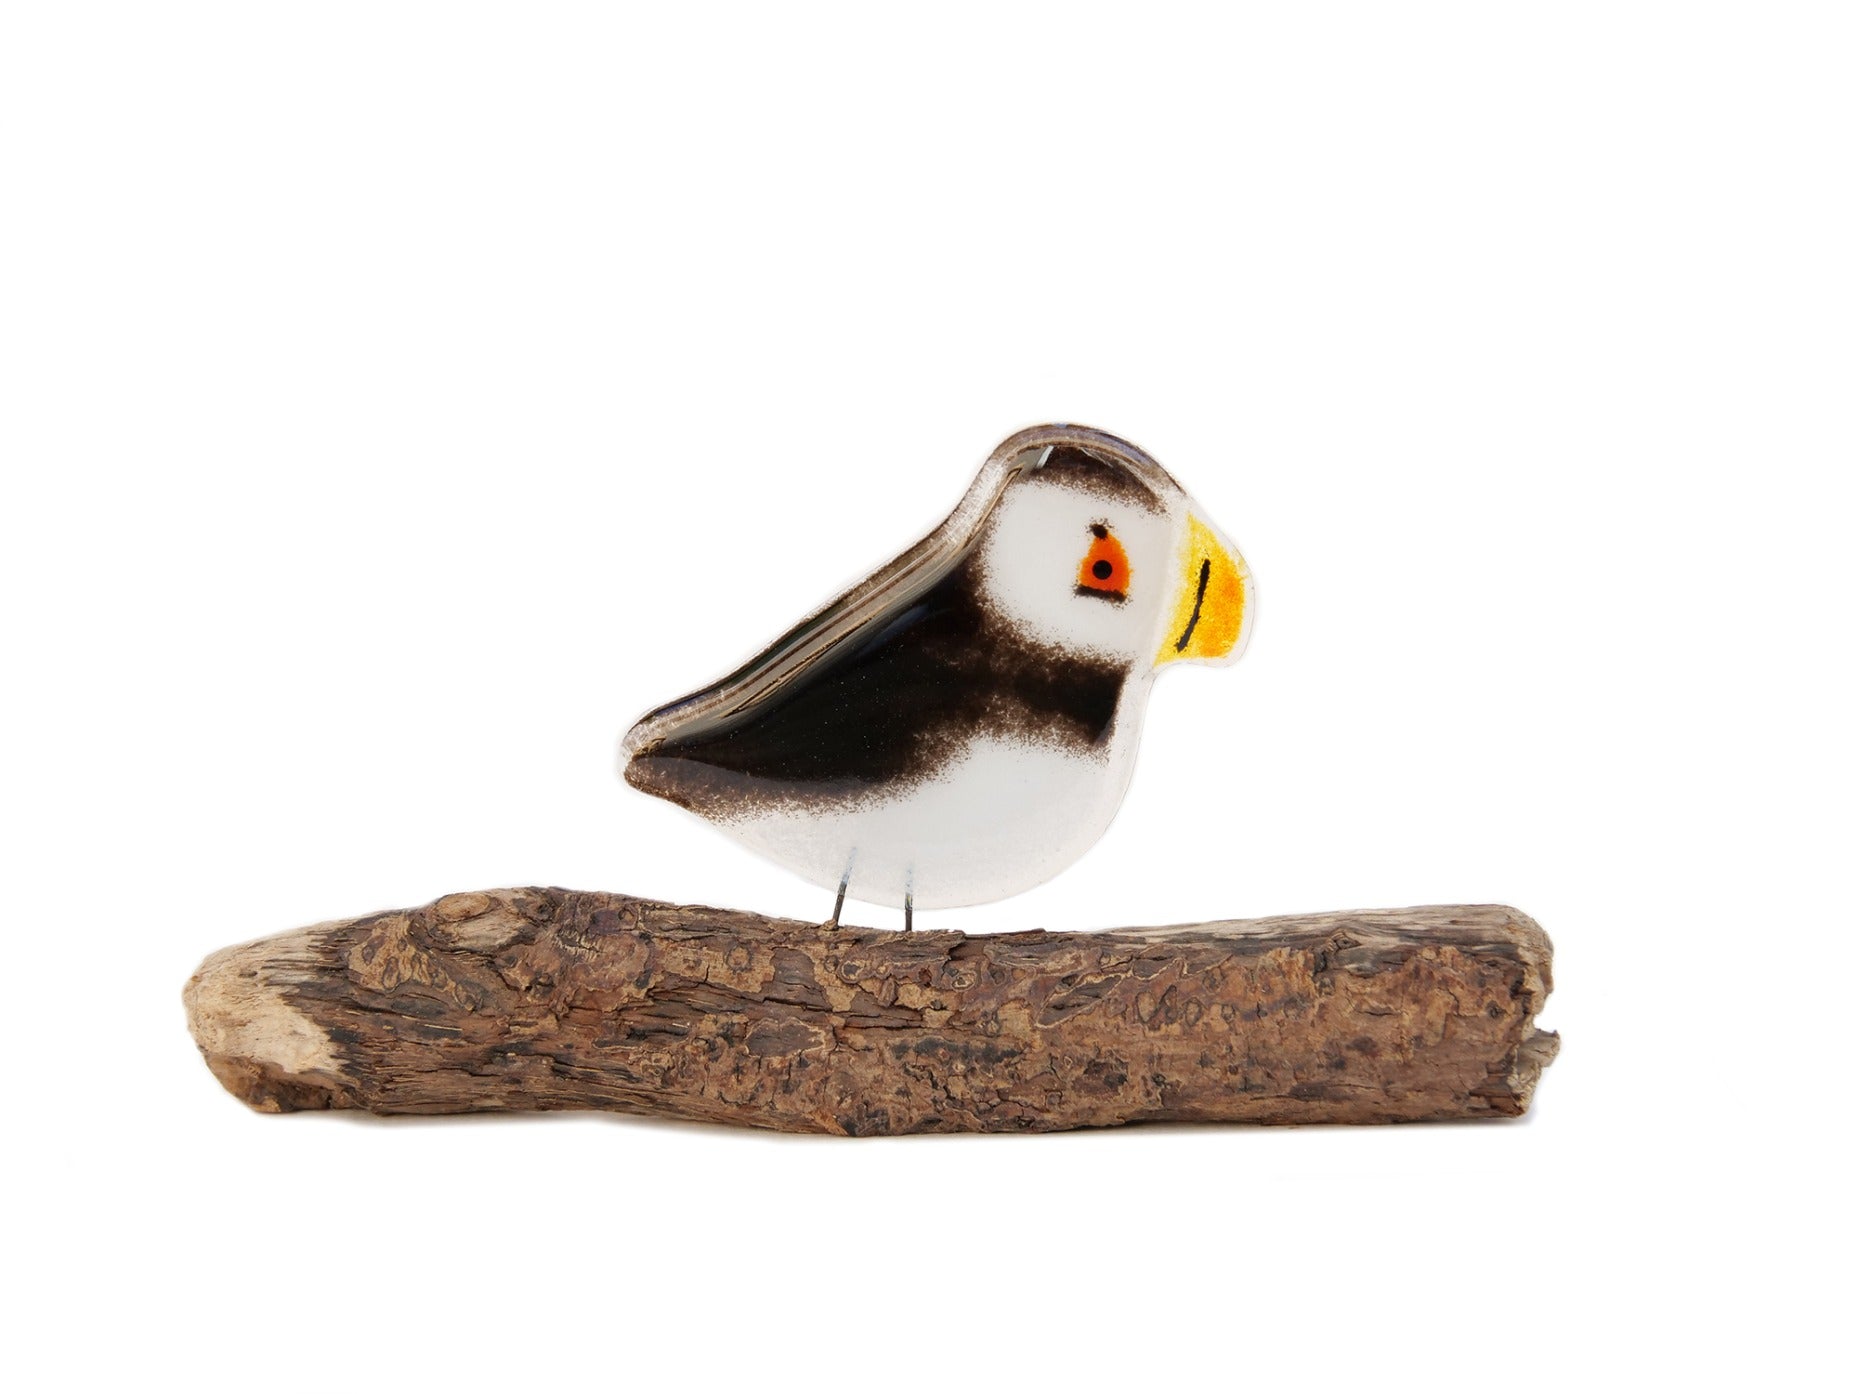 Glass Atlantic Puffin sculpture on driftwood, handmade in Canada.